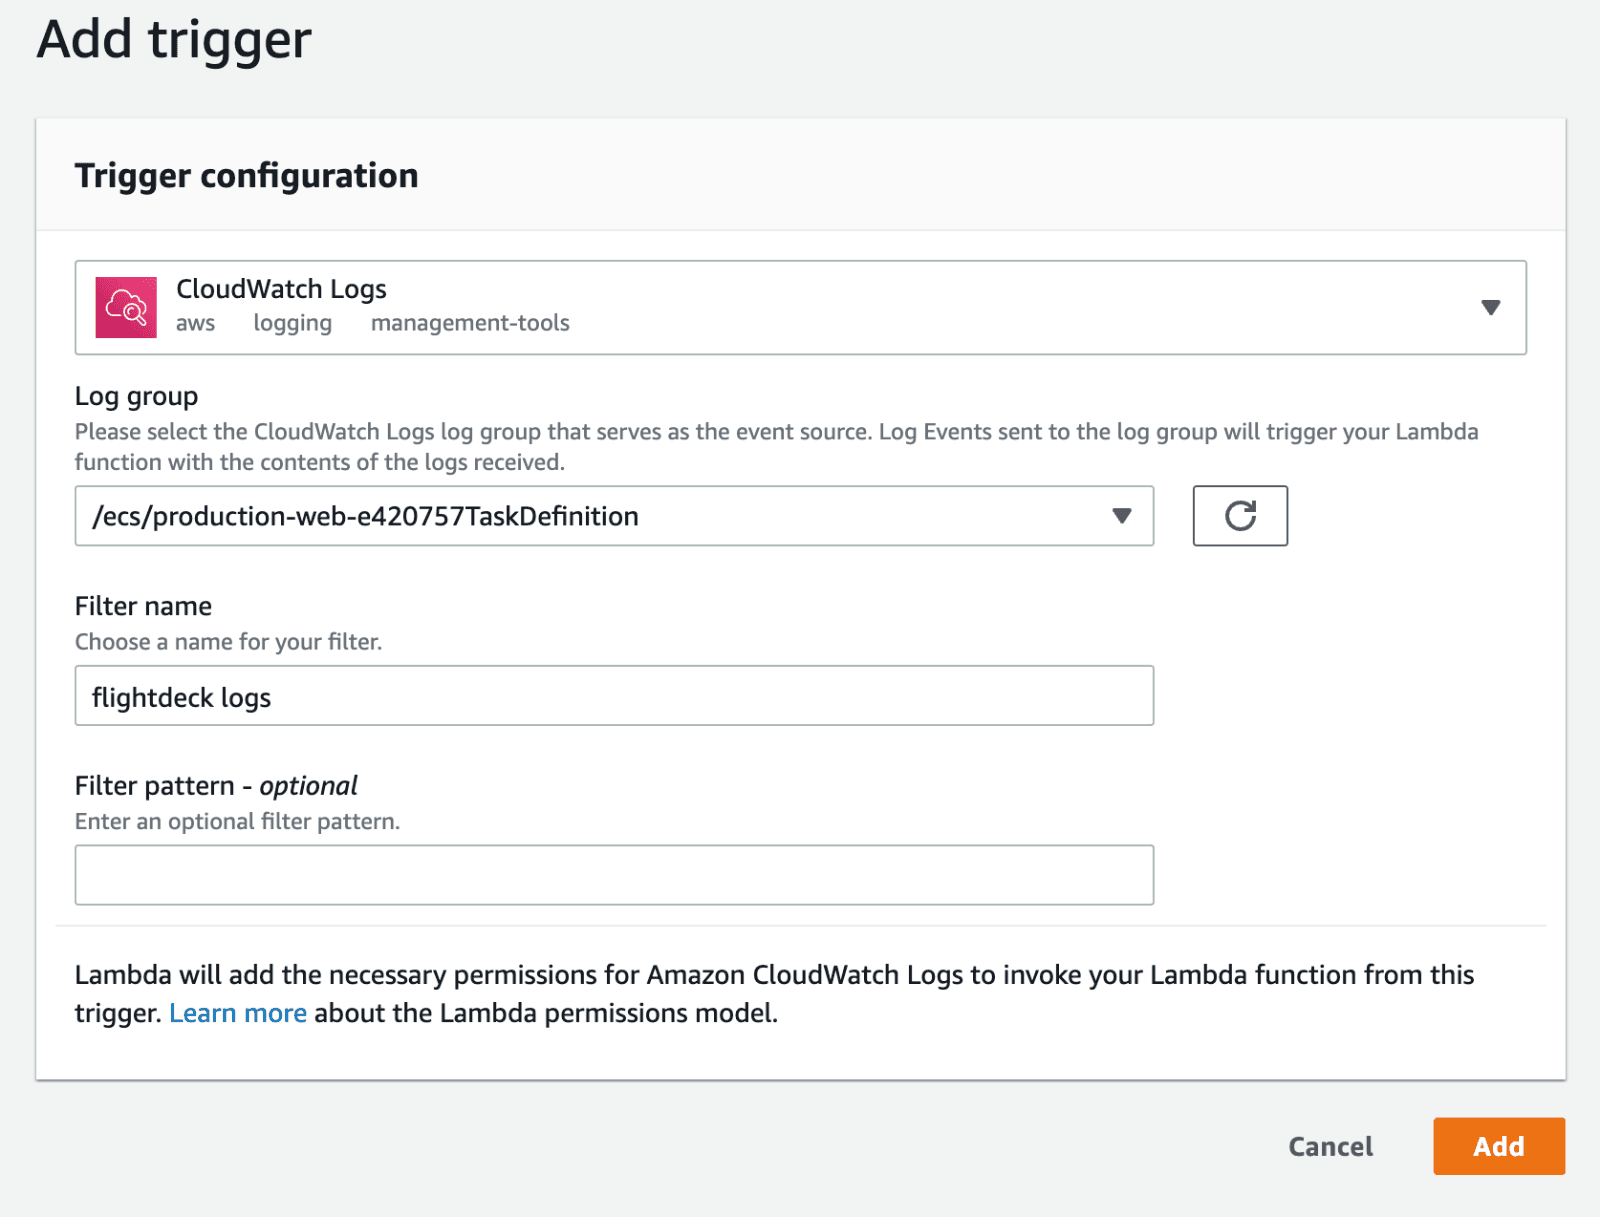 Adding trigger for CloudWatch Logs